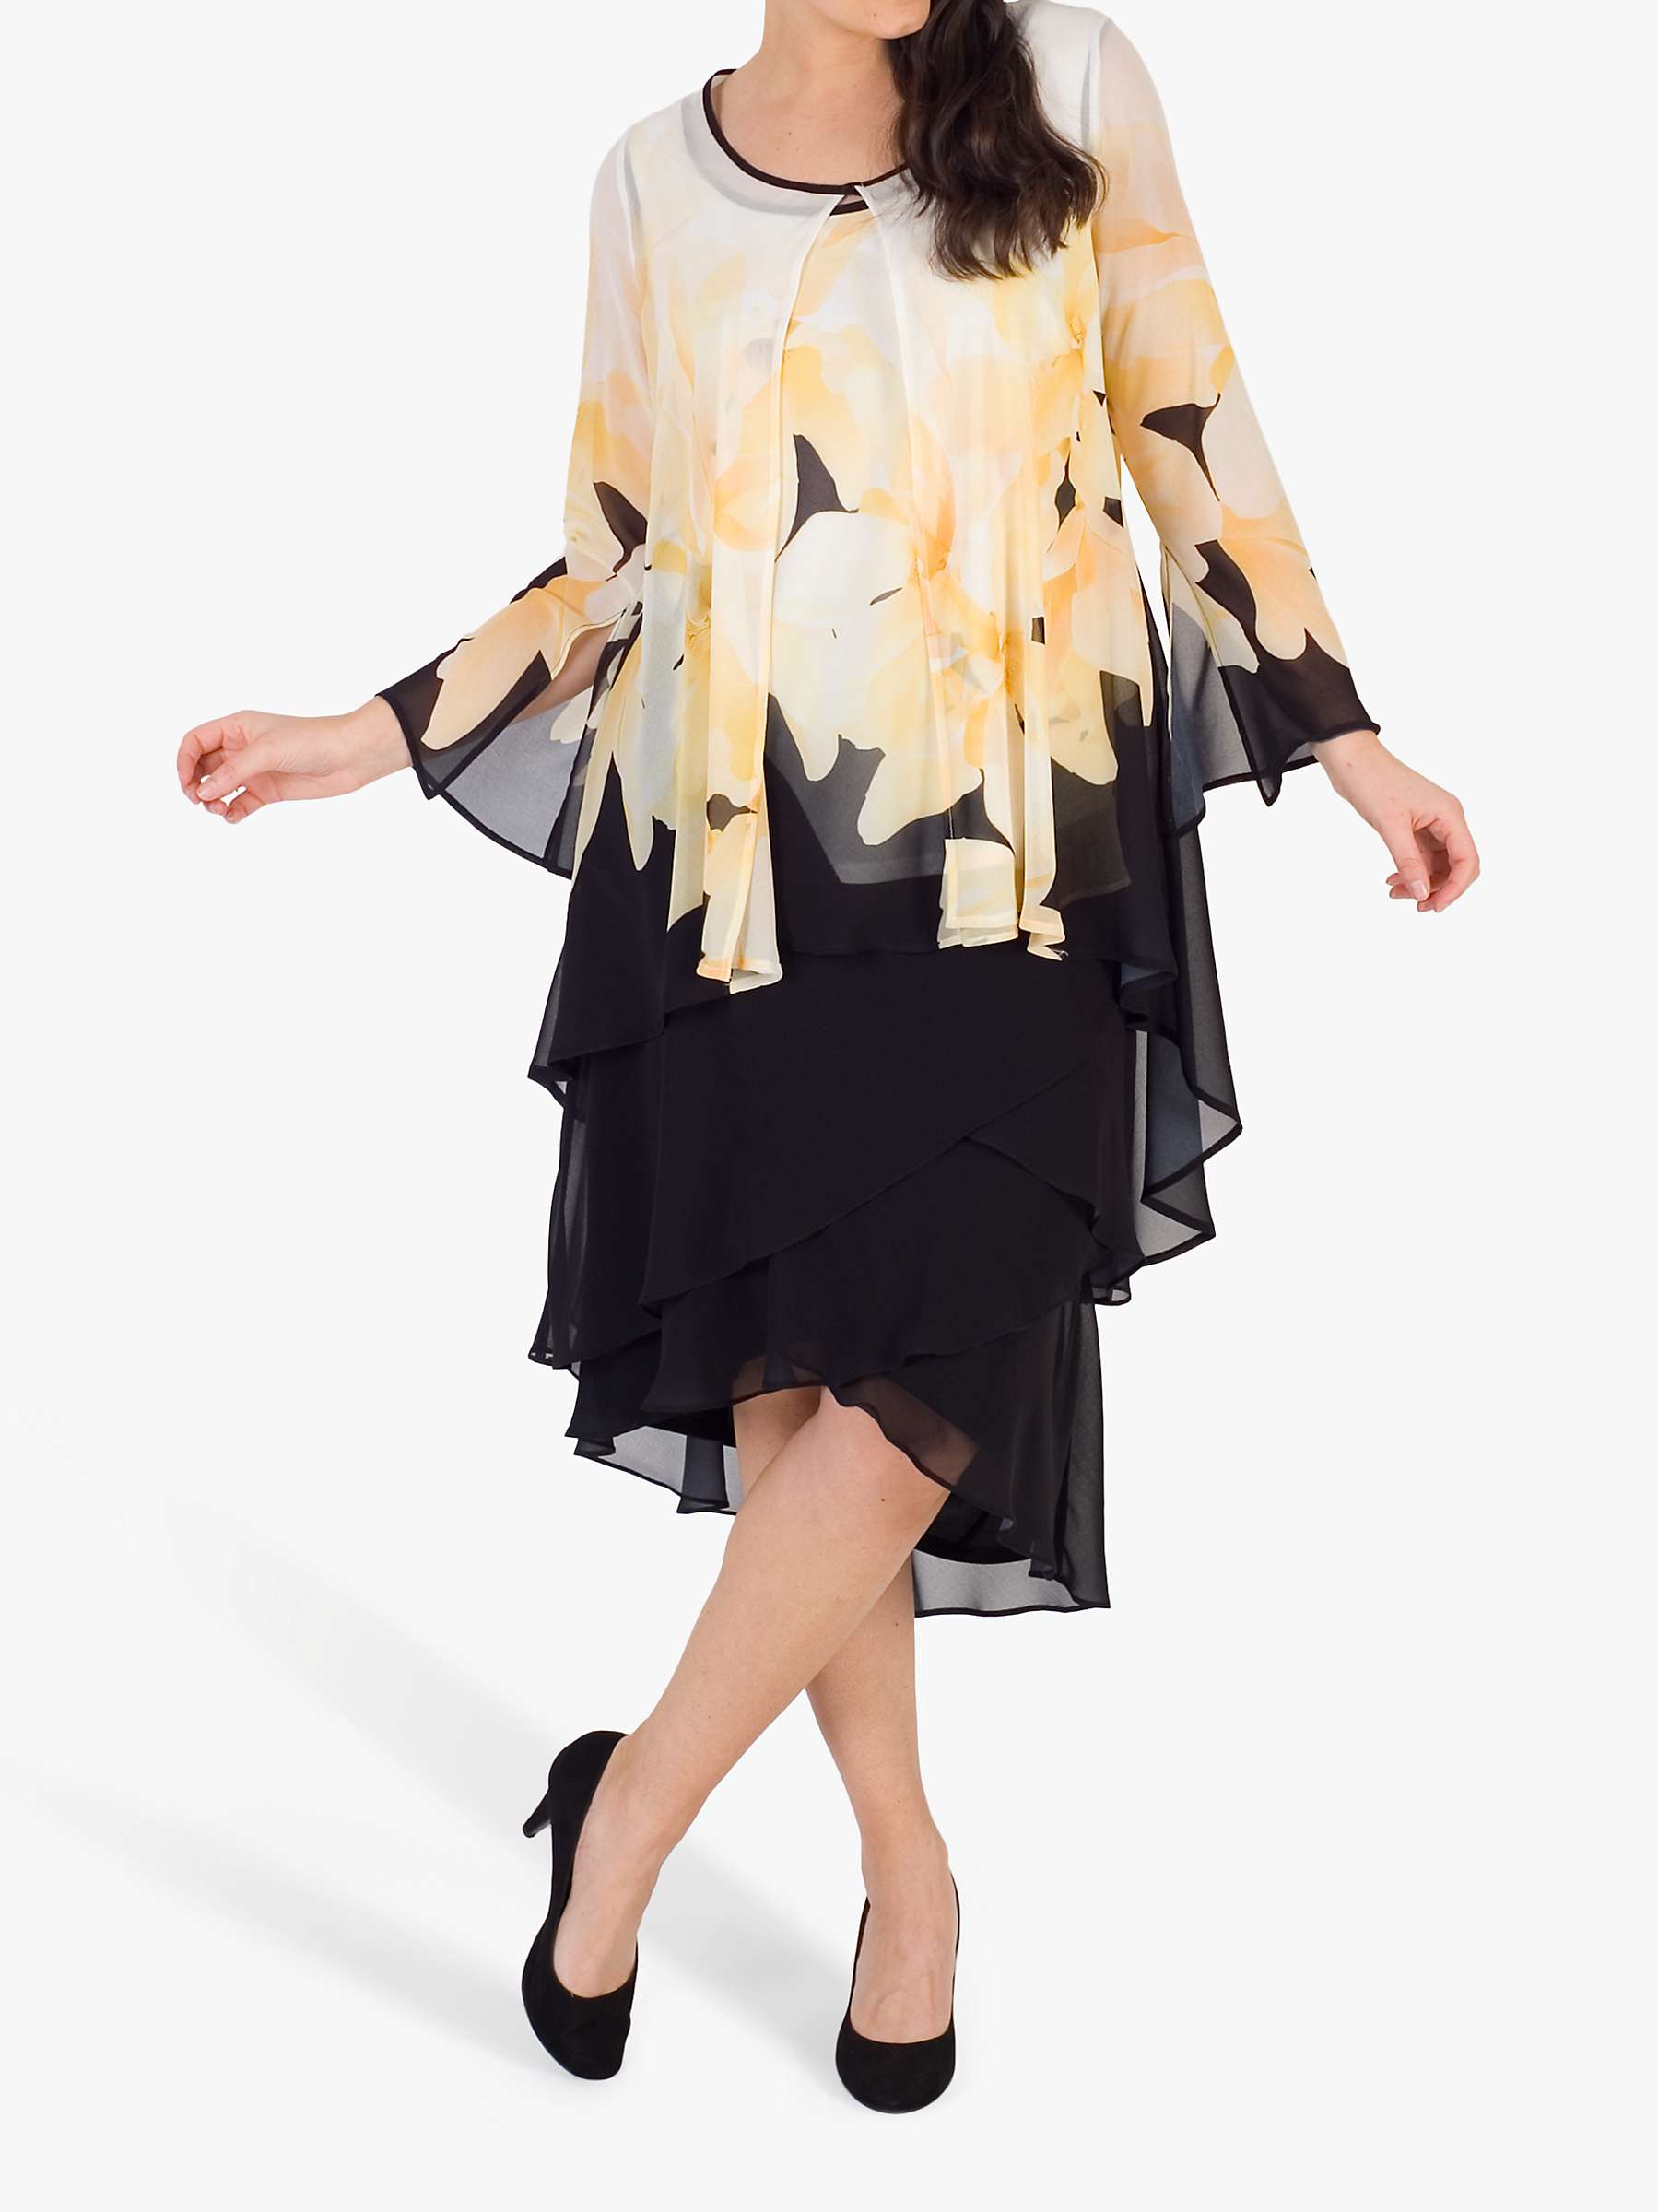 Buy chesca Semi-Sheer Floral Print Chiffon Jacket, Black/Yellow/Ivory Online at johnlewis.com